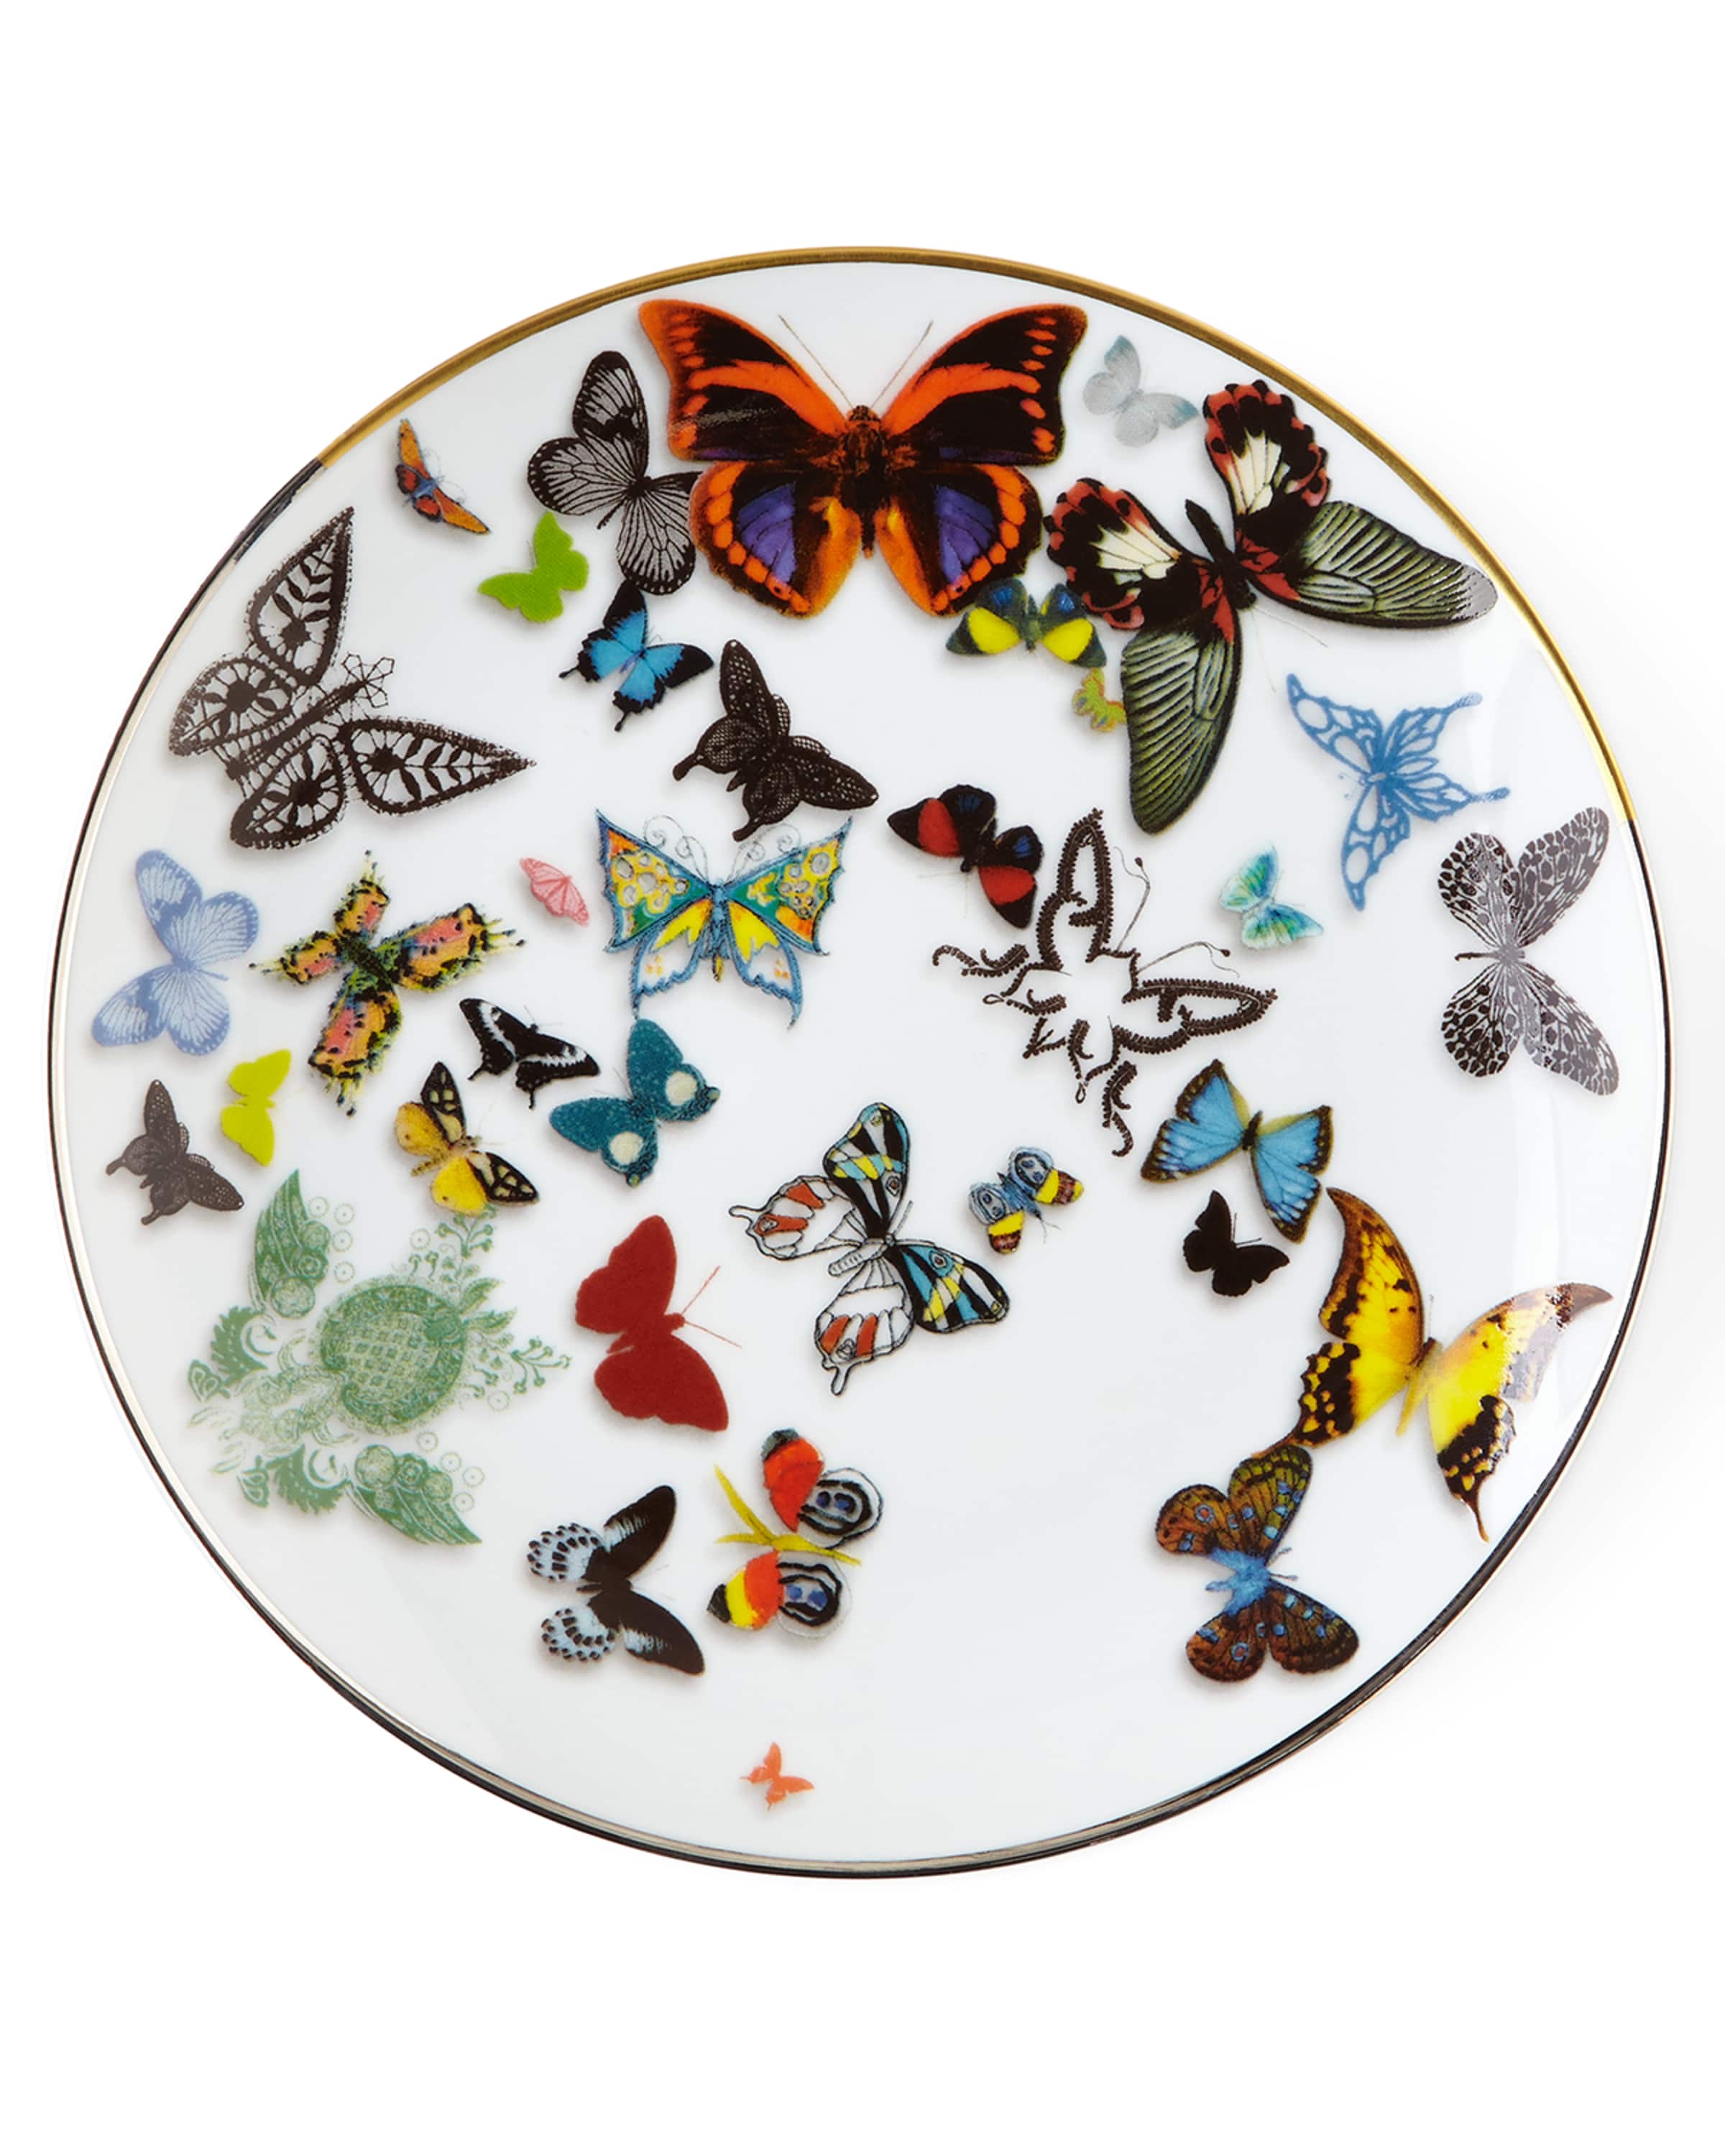 Christian Lacroix Butterfly Parade Dessert Plate